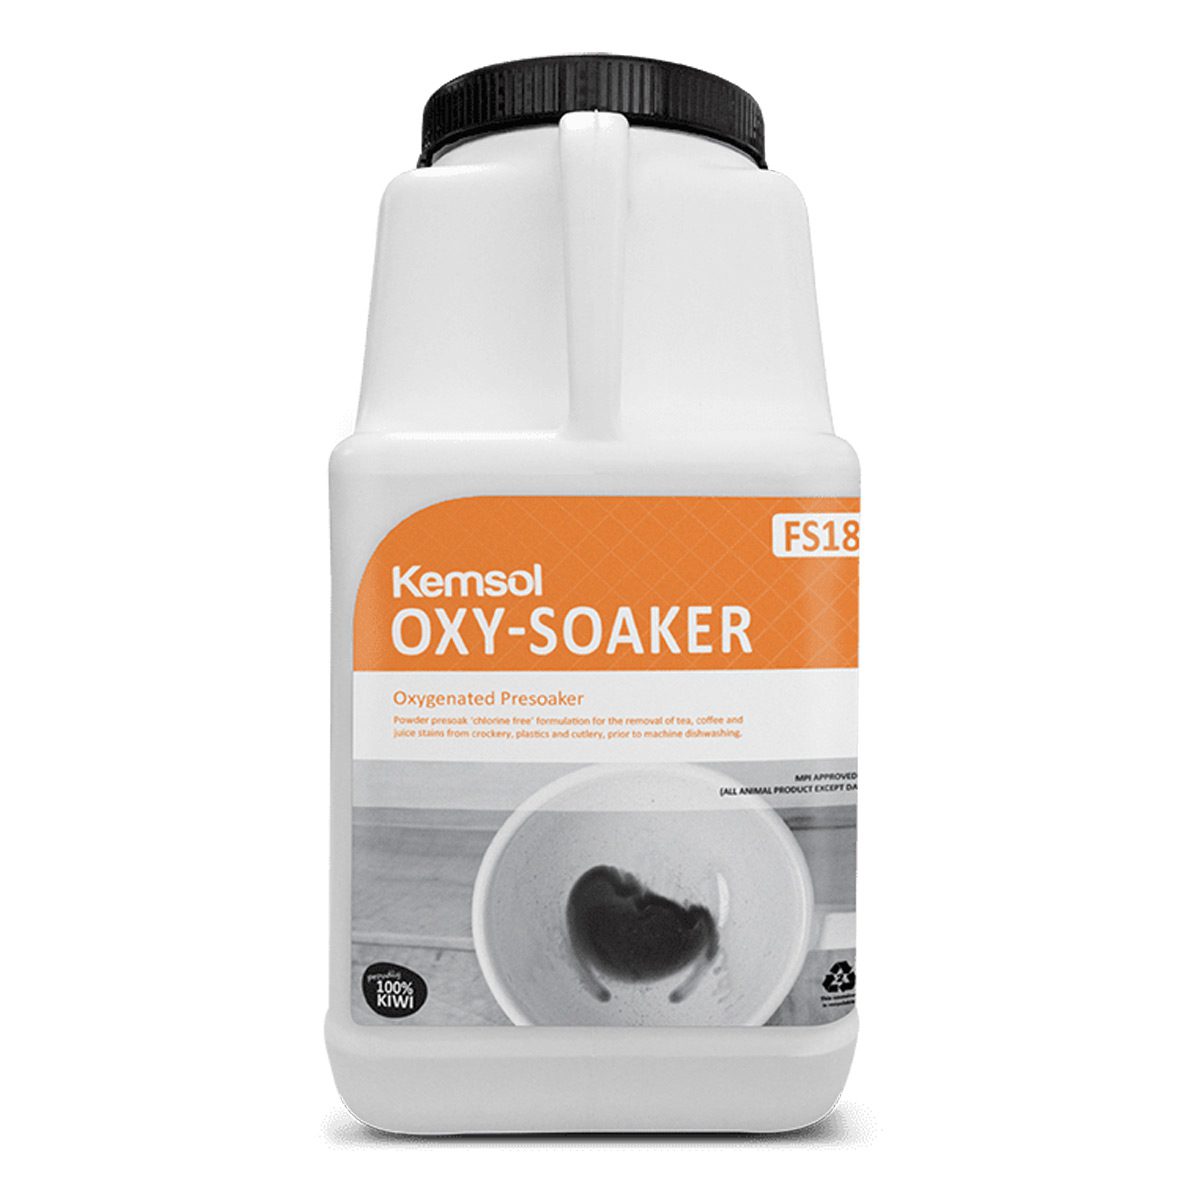 cleaning-products-kitchen-multipurpose-kemsol-oxy-soaker-5kg-powder-pre-soak-chlorine-free-for-removal-tea-coffee-juice-stains-crockery-plastics-cutlery-prior-to-dishwashing-vjs-distributors-KOXYS